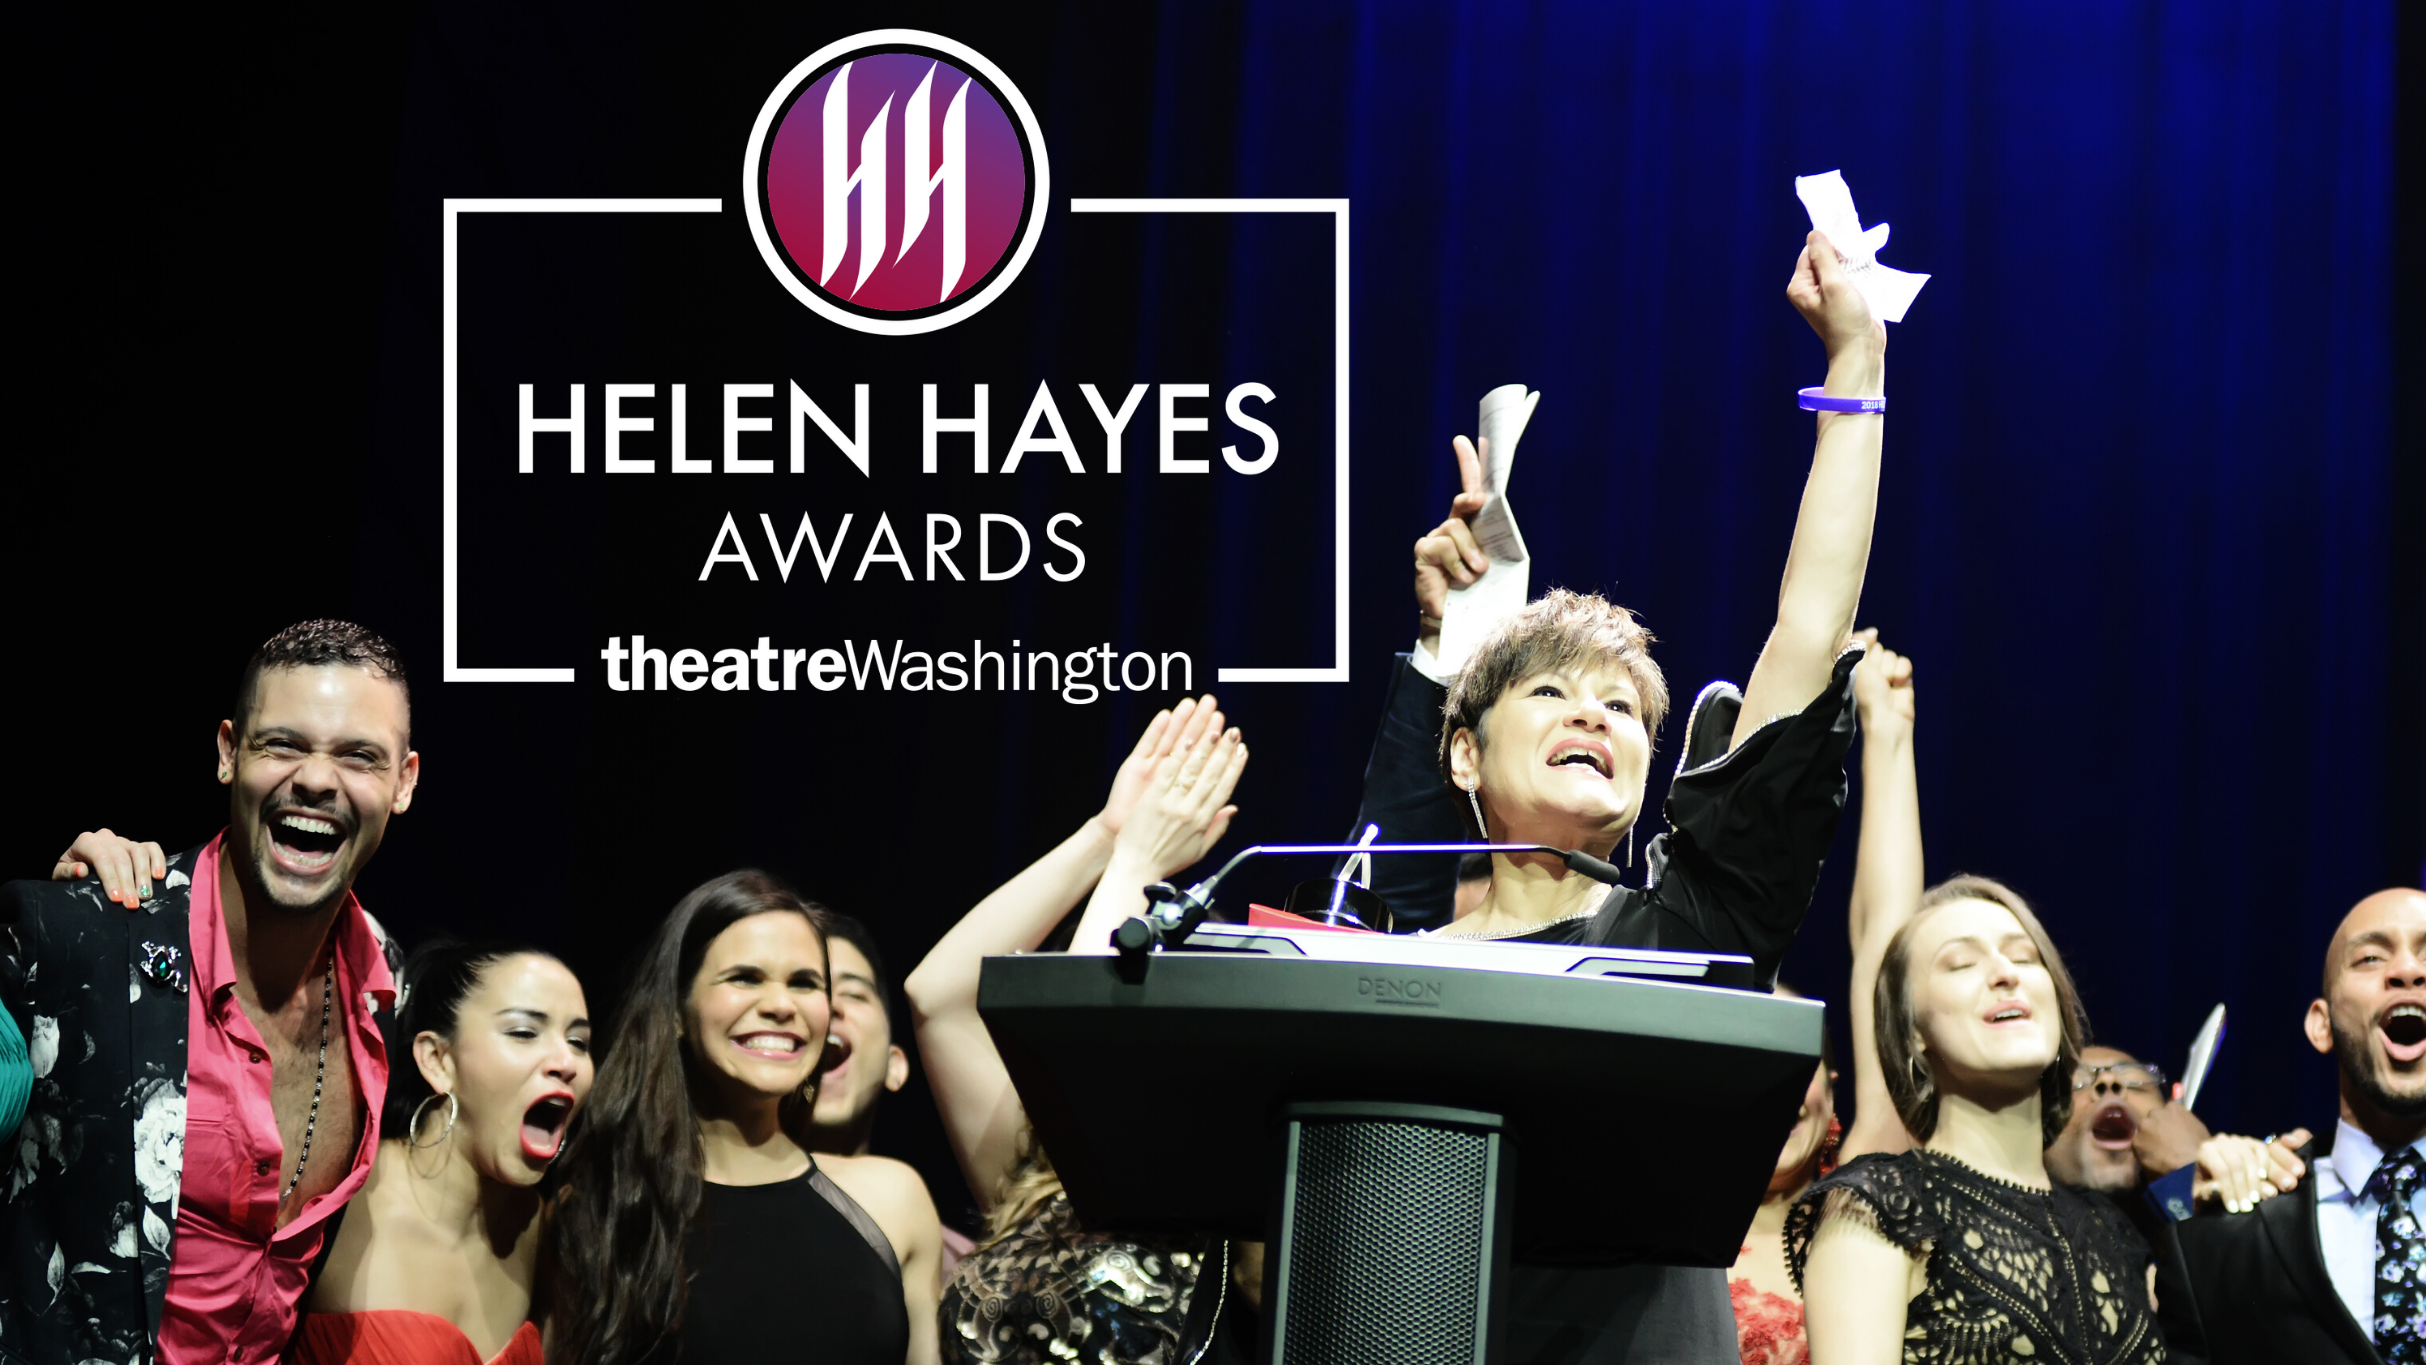 Helen Hayes Awards at The Anthem